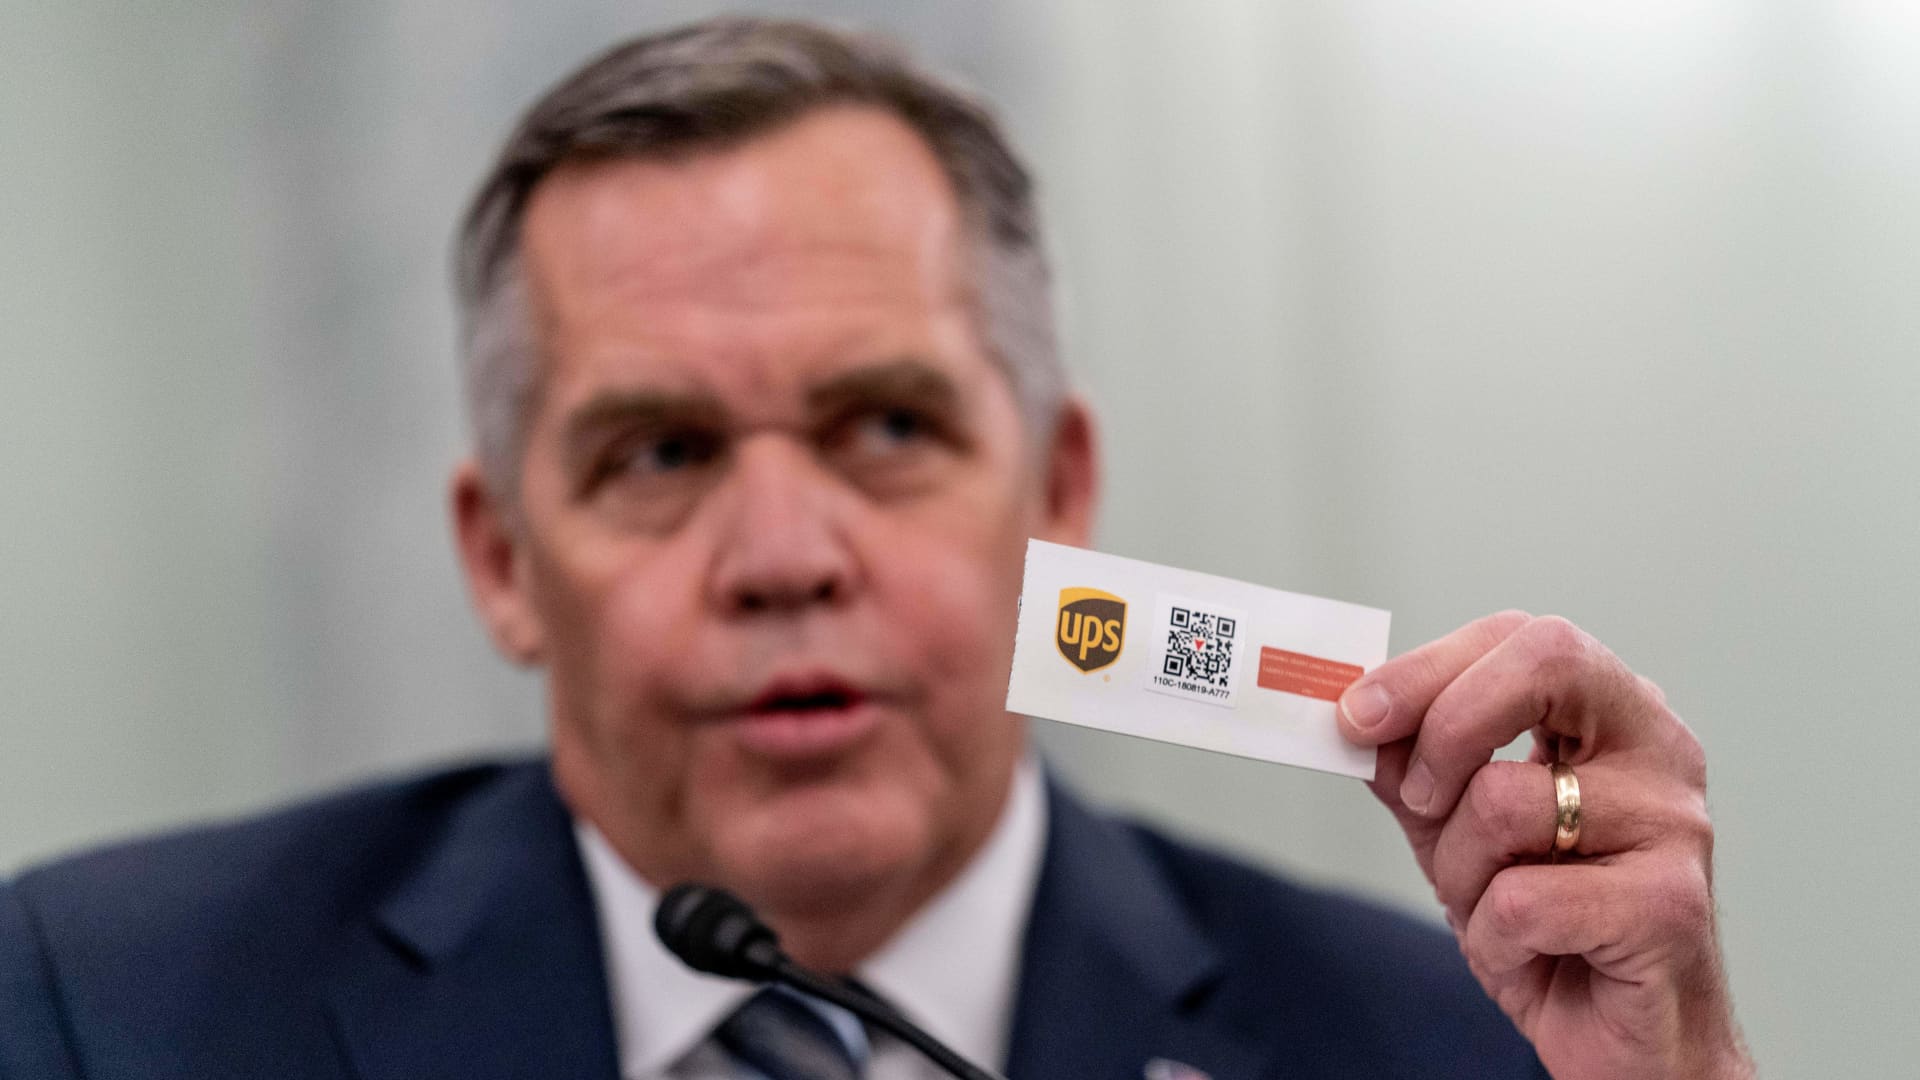 United Parcel Service President of Global Healthcare, Wesley Wheeler, holds up an example of one of UPSs tracking system as he speaks at a Senate Transportation subcommittee hybrid hearing on transporting a coronavirus vaccine on December 10, 2020, in Washington, DC.